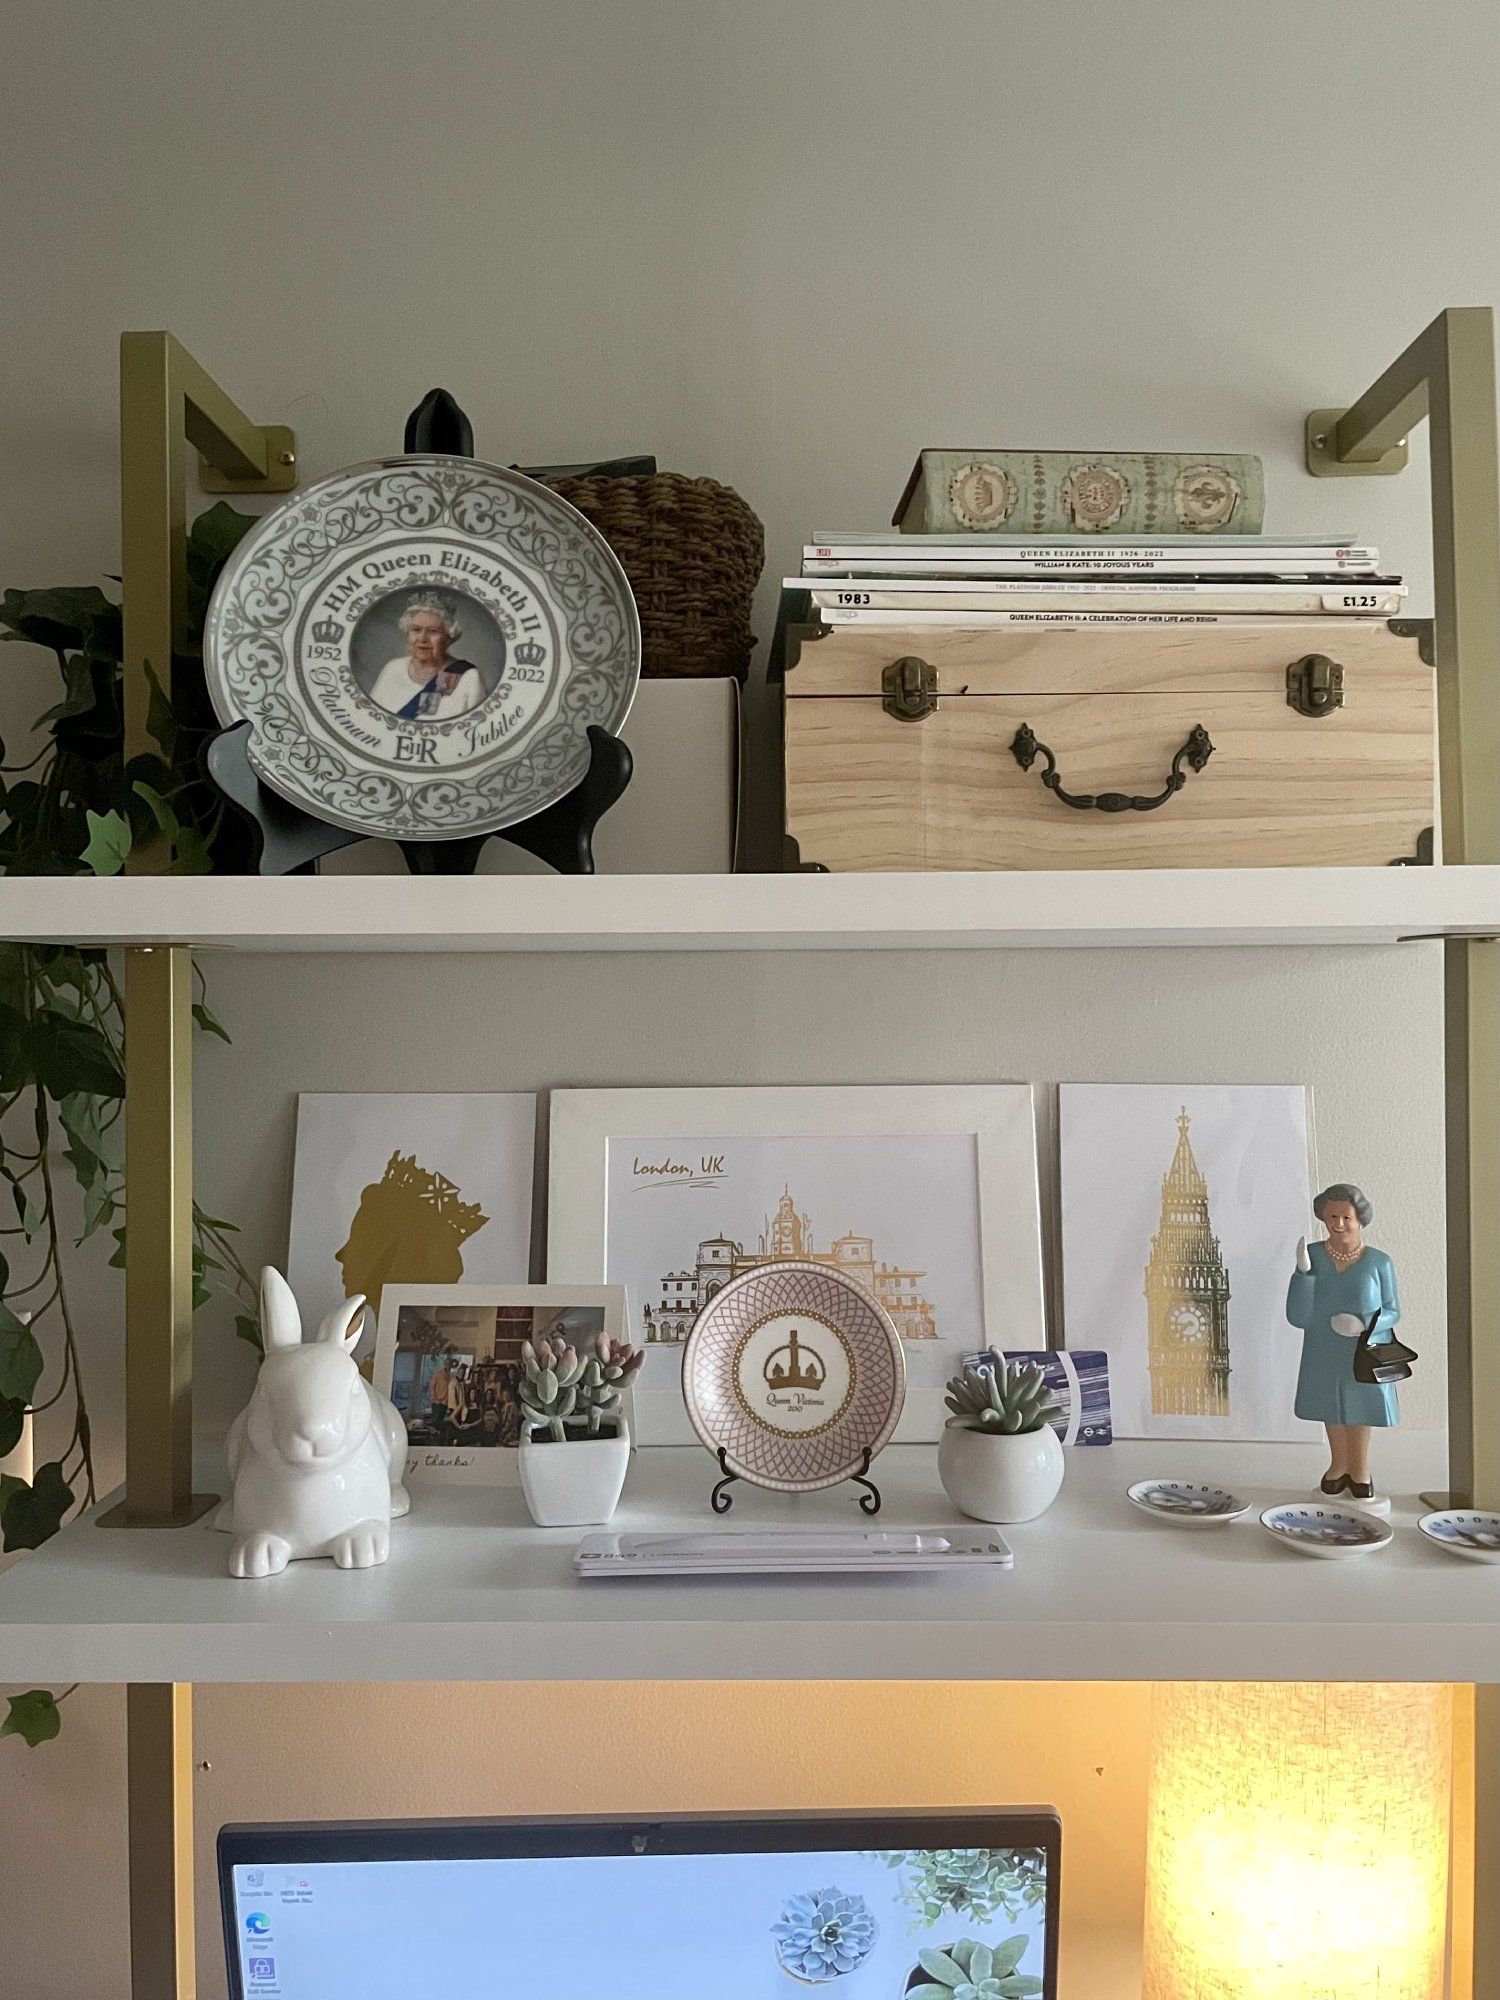 A Queen Elizabeth figurine, London postcards, and other British souvenirs on the shelves in Rochelle’s home office